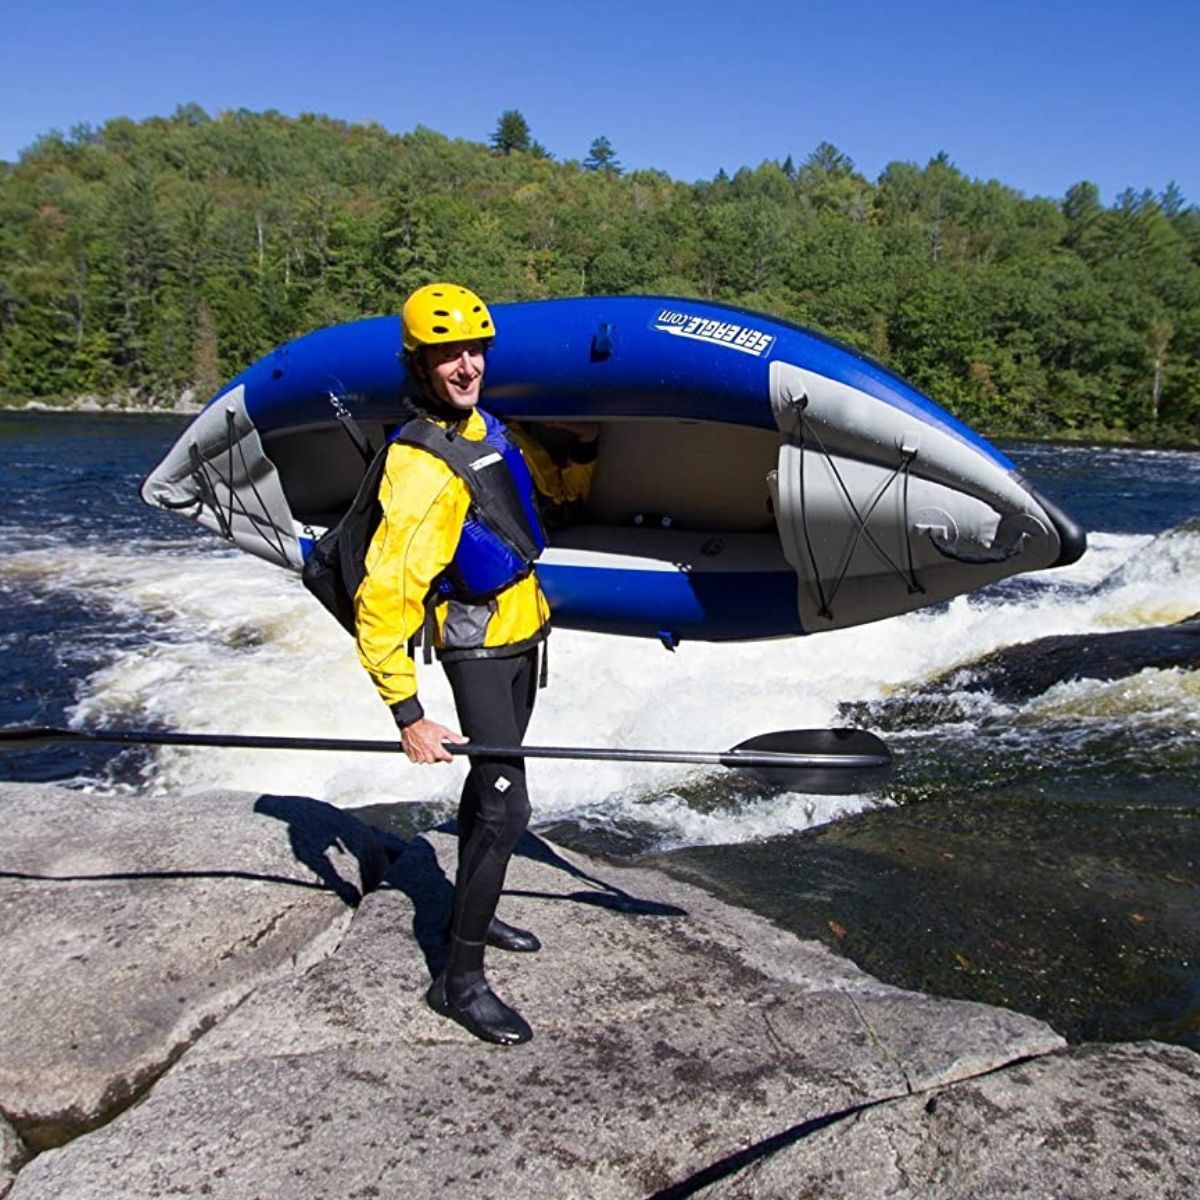 Paddlin' in Style: 5 Best Inflatable Kayaks to Make a Splash This Summer